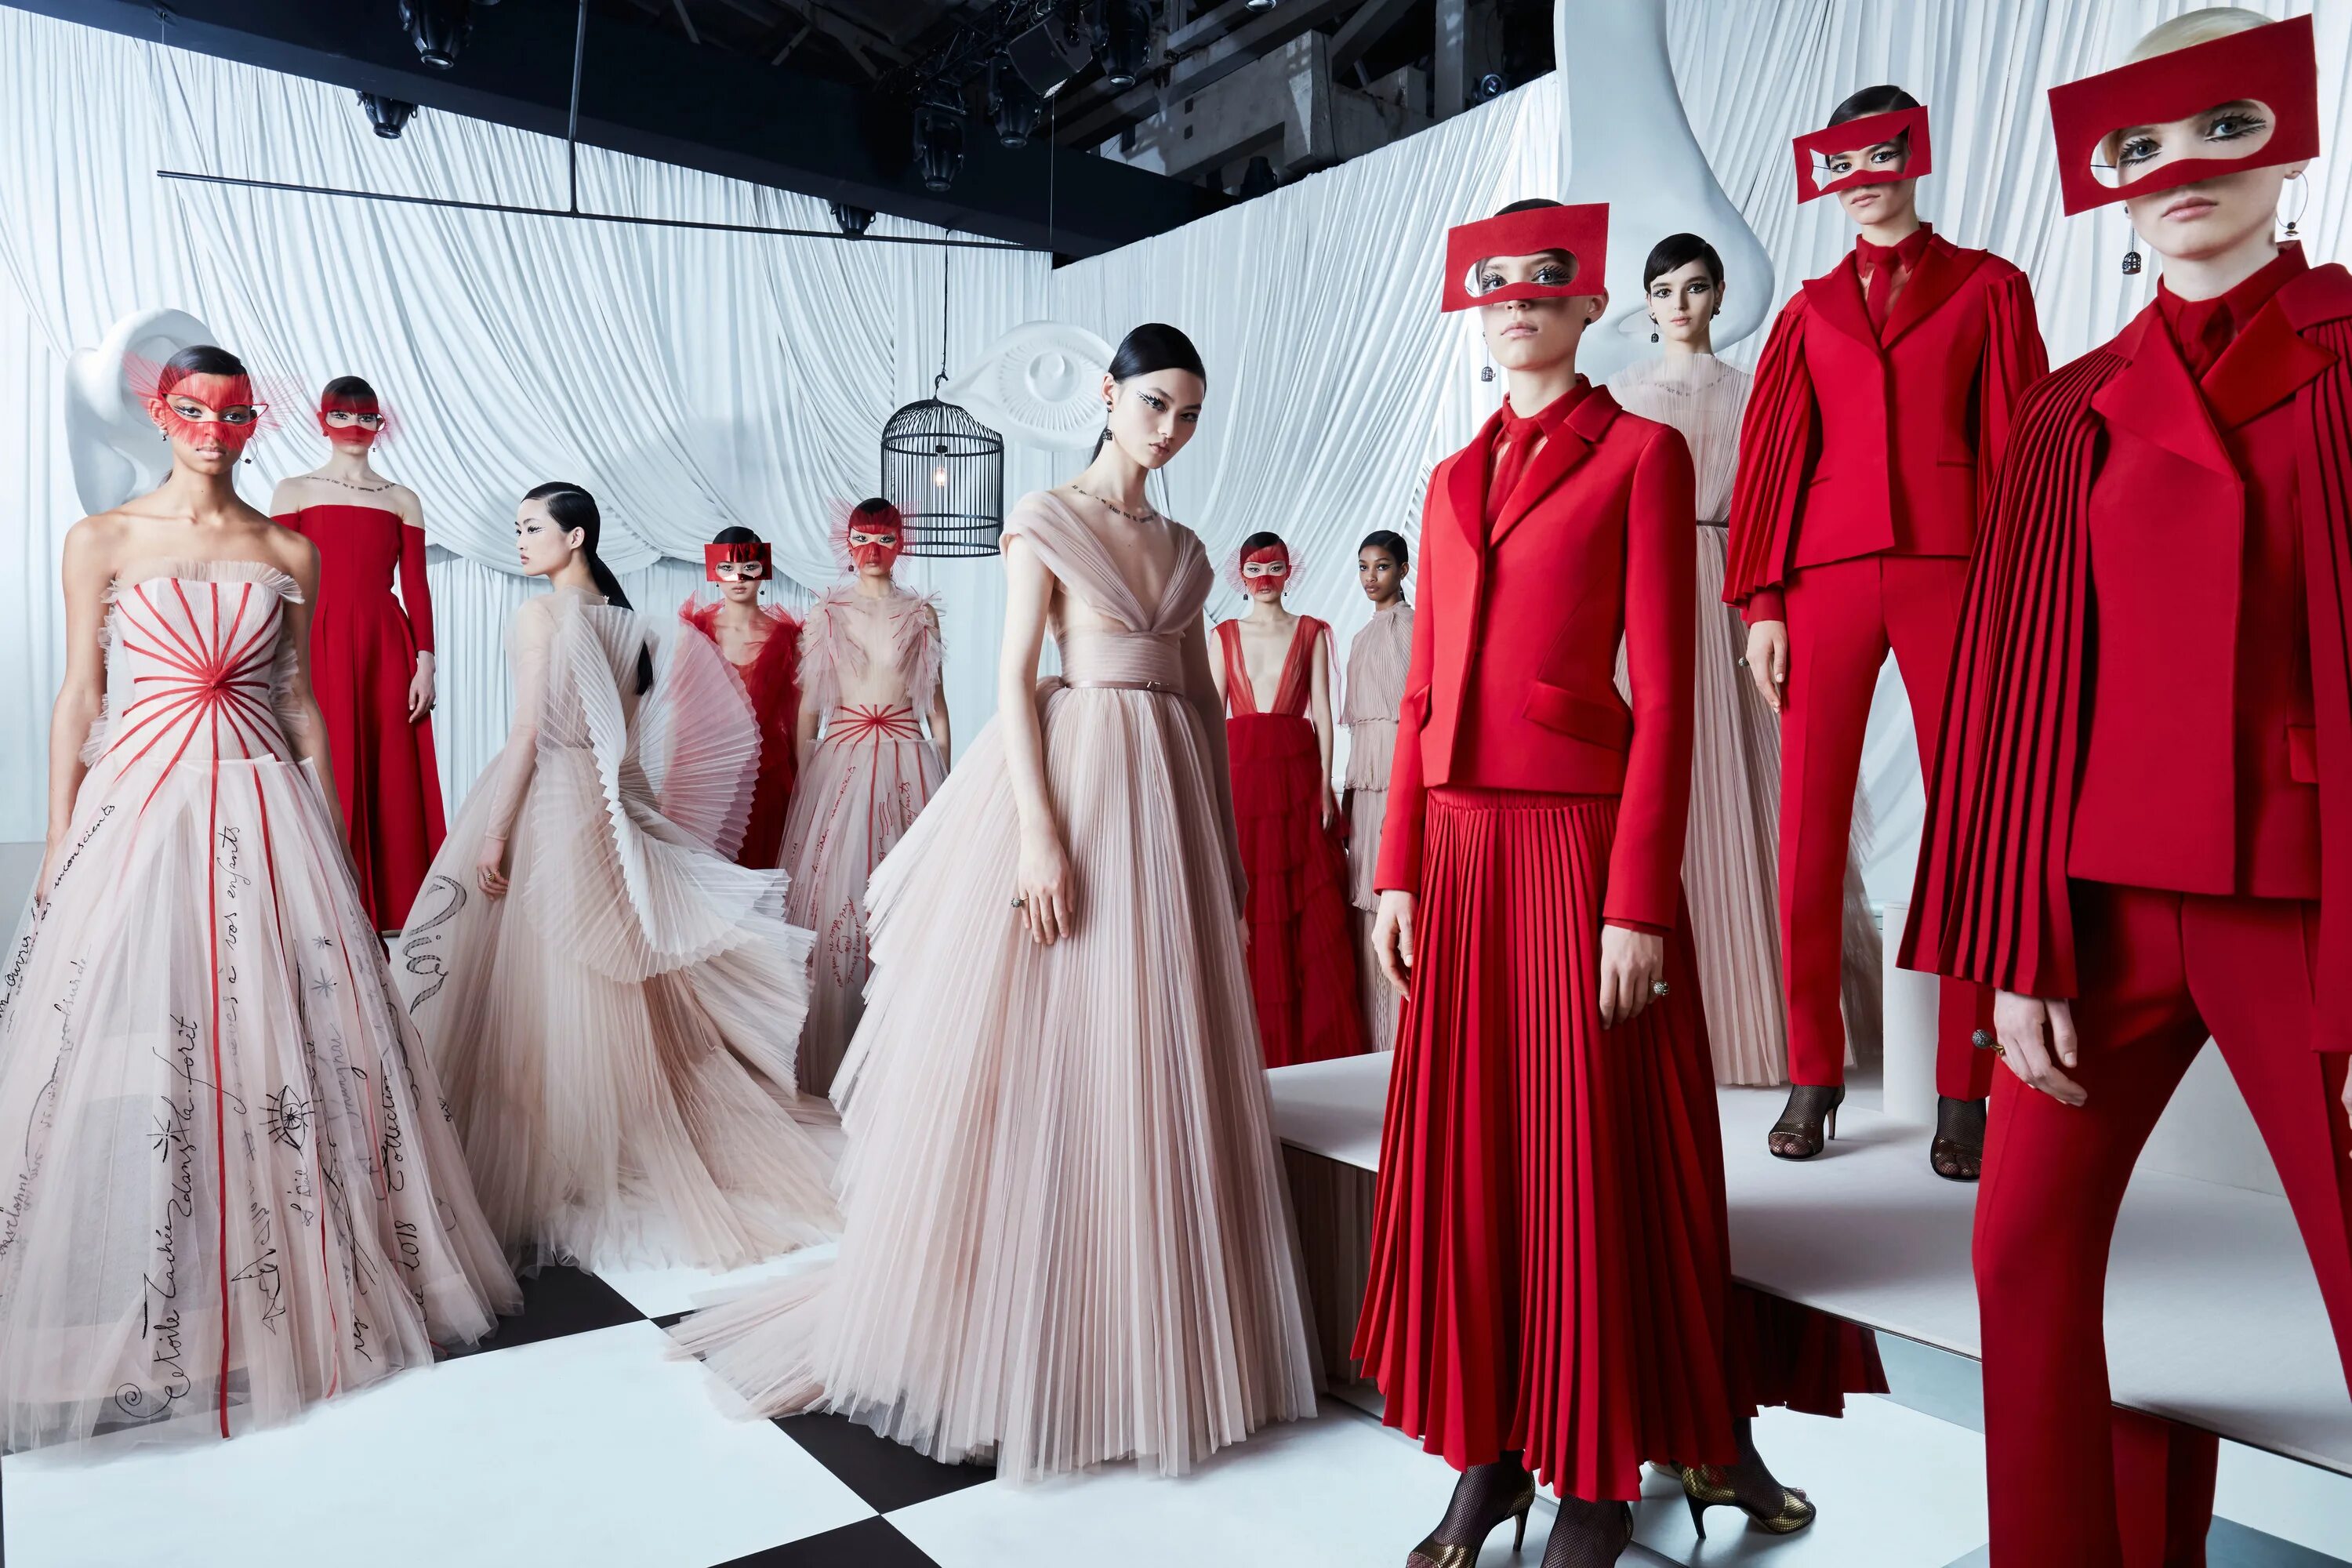 Dior collection. Диор 2022 Haute Couture. Кристиан диор мода. Показ коллекции Кристиан диор 2022. Показ коллекции Кристиан диор 2018.